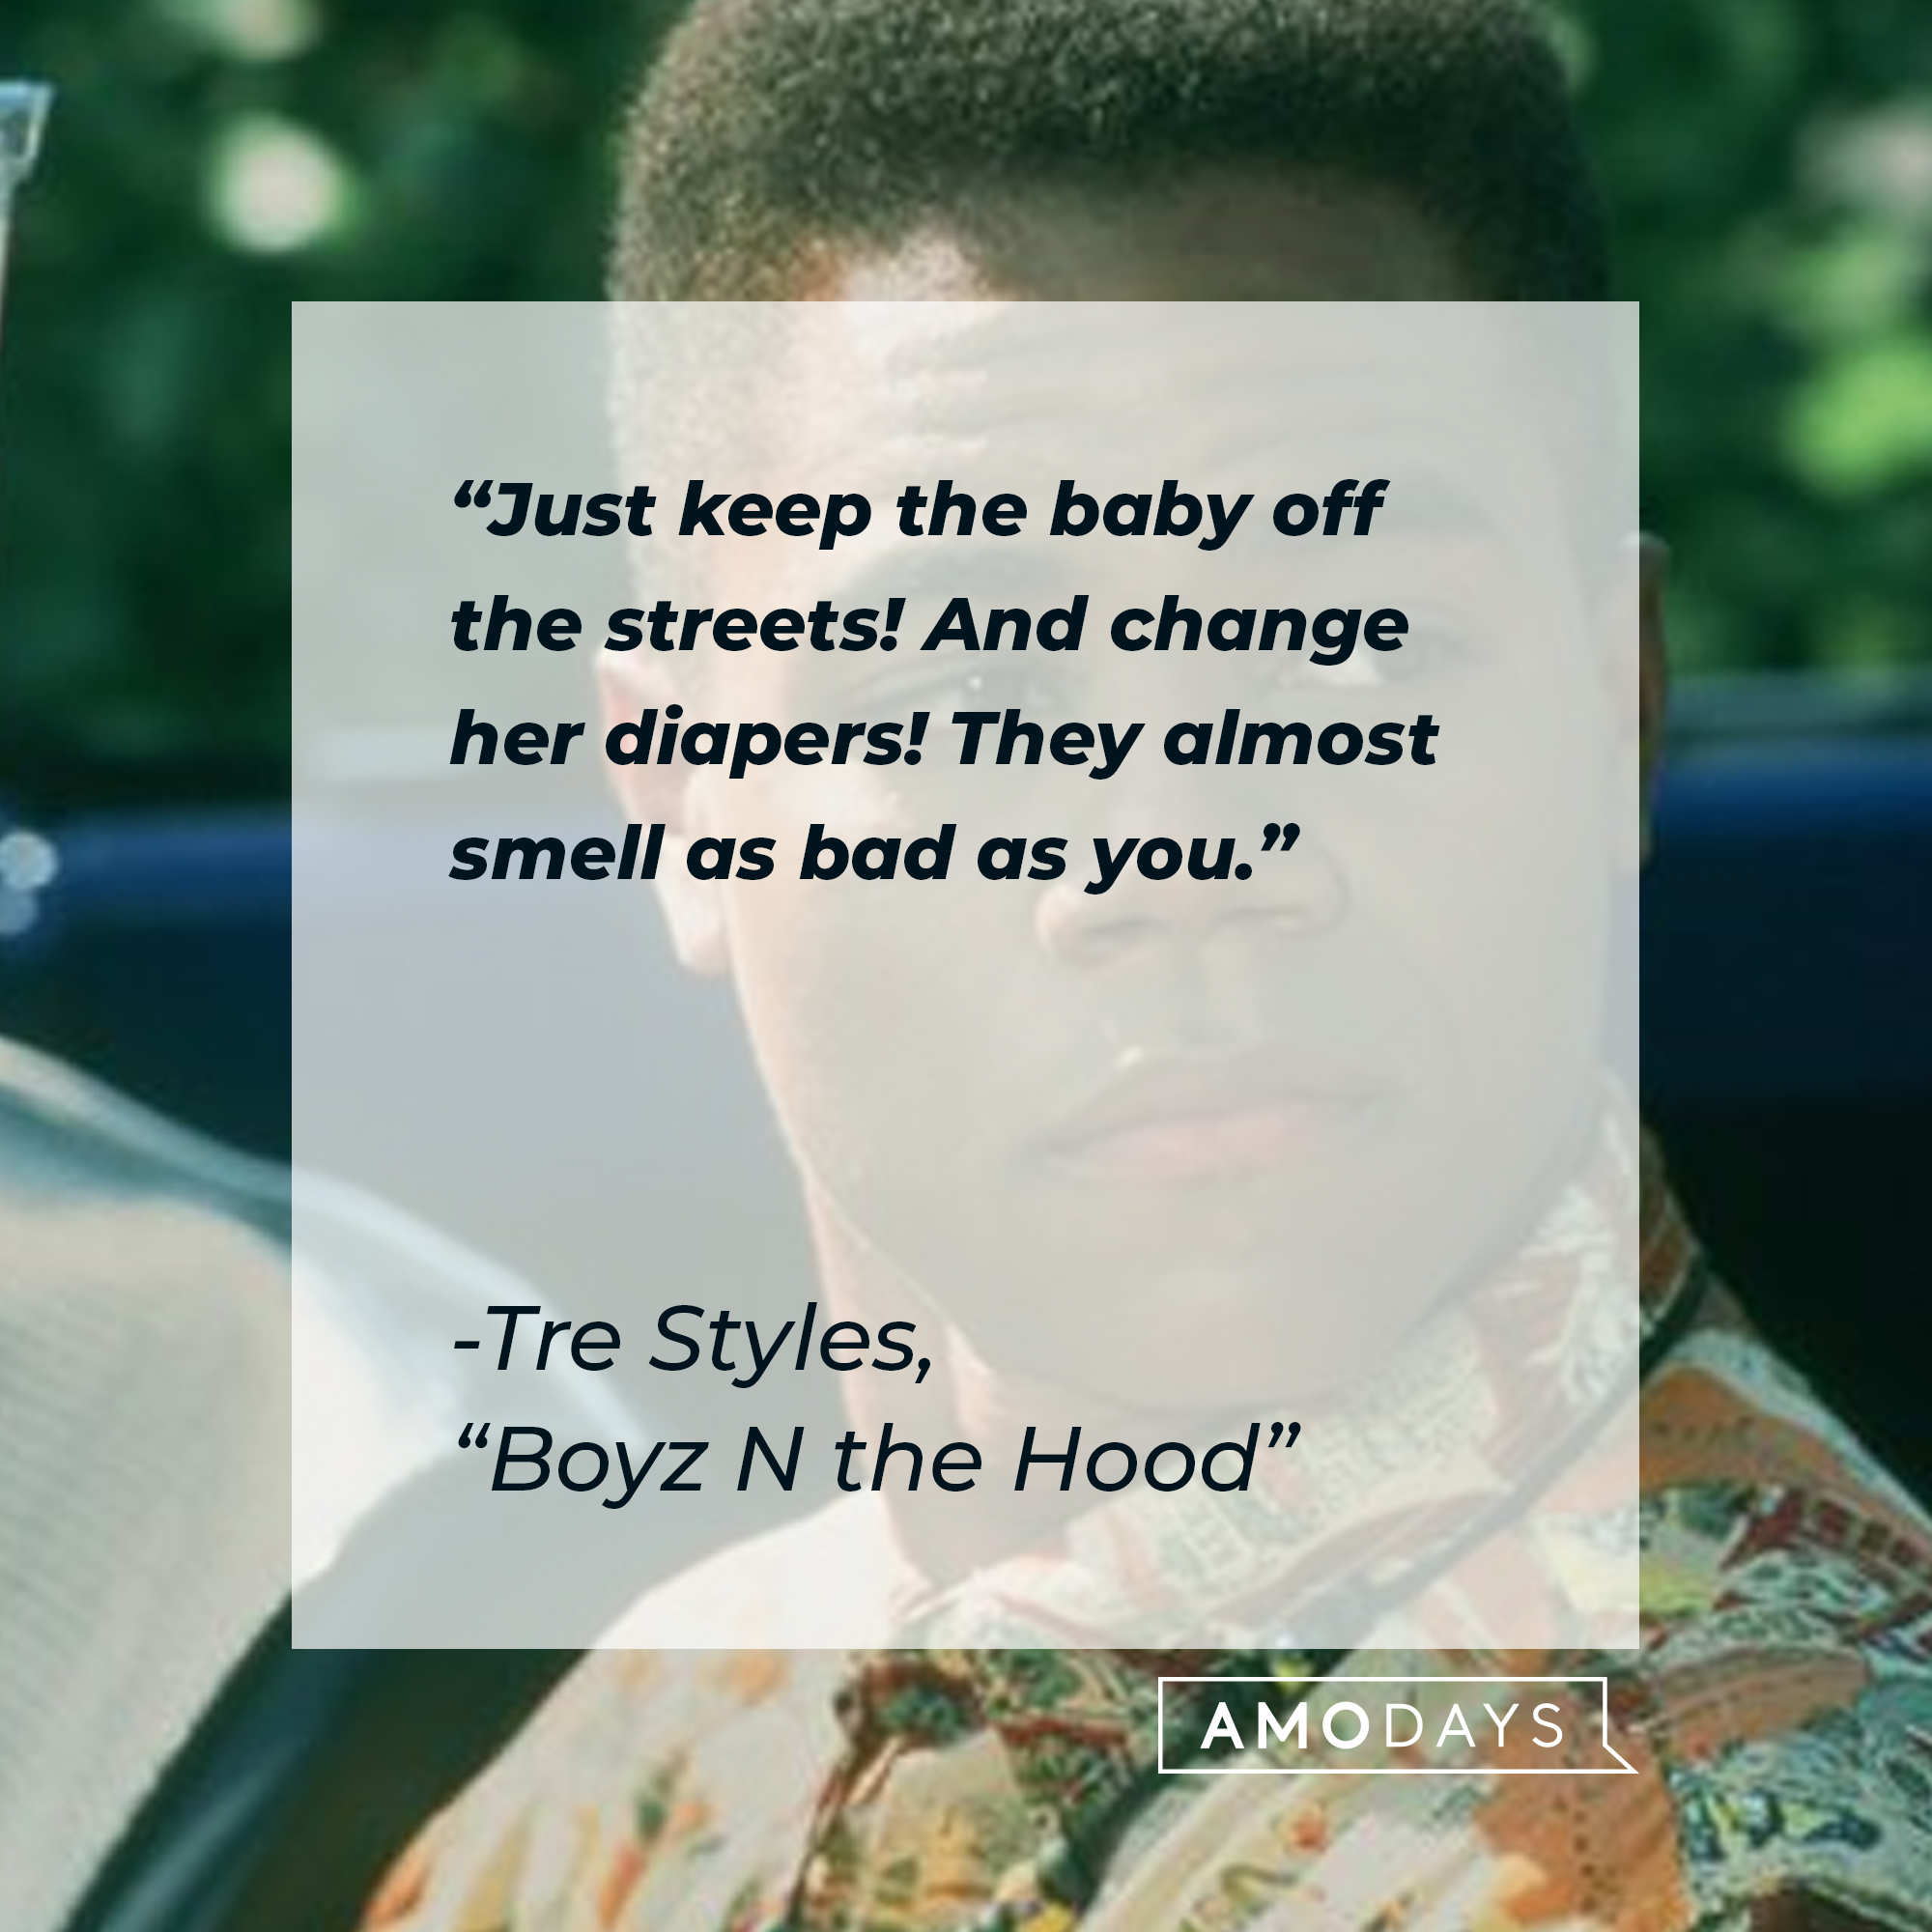 Tre Style's quote in "Boyz N the Hood:" "Just keep the baby off the streets! And change her diapers! They almost smell as bad as you." | Source: Facebook.com/BoyzNtheHood